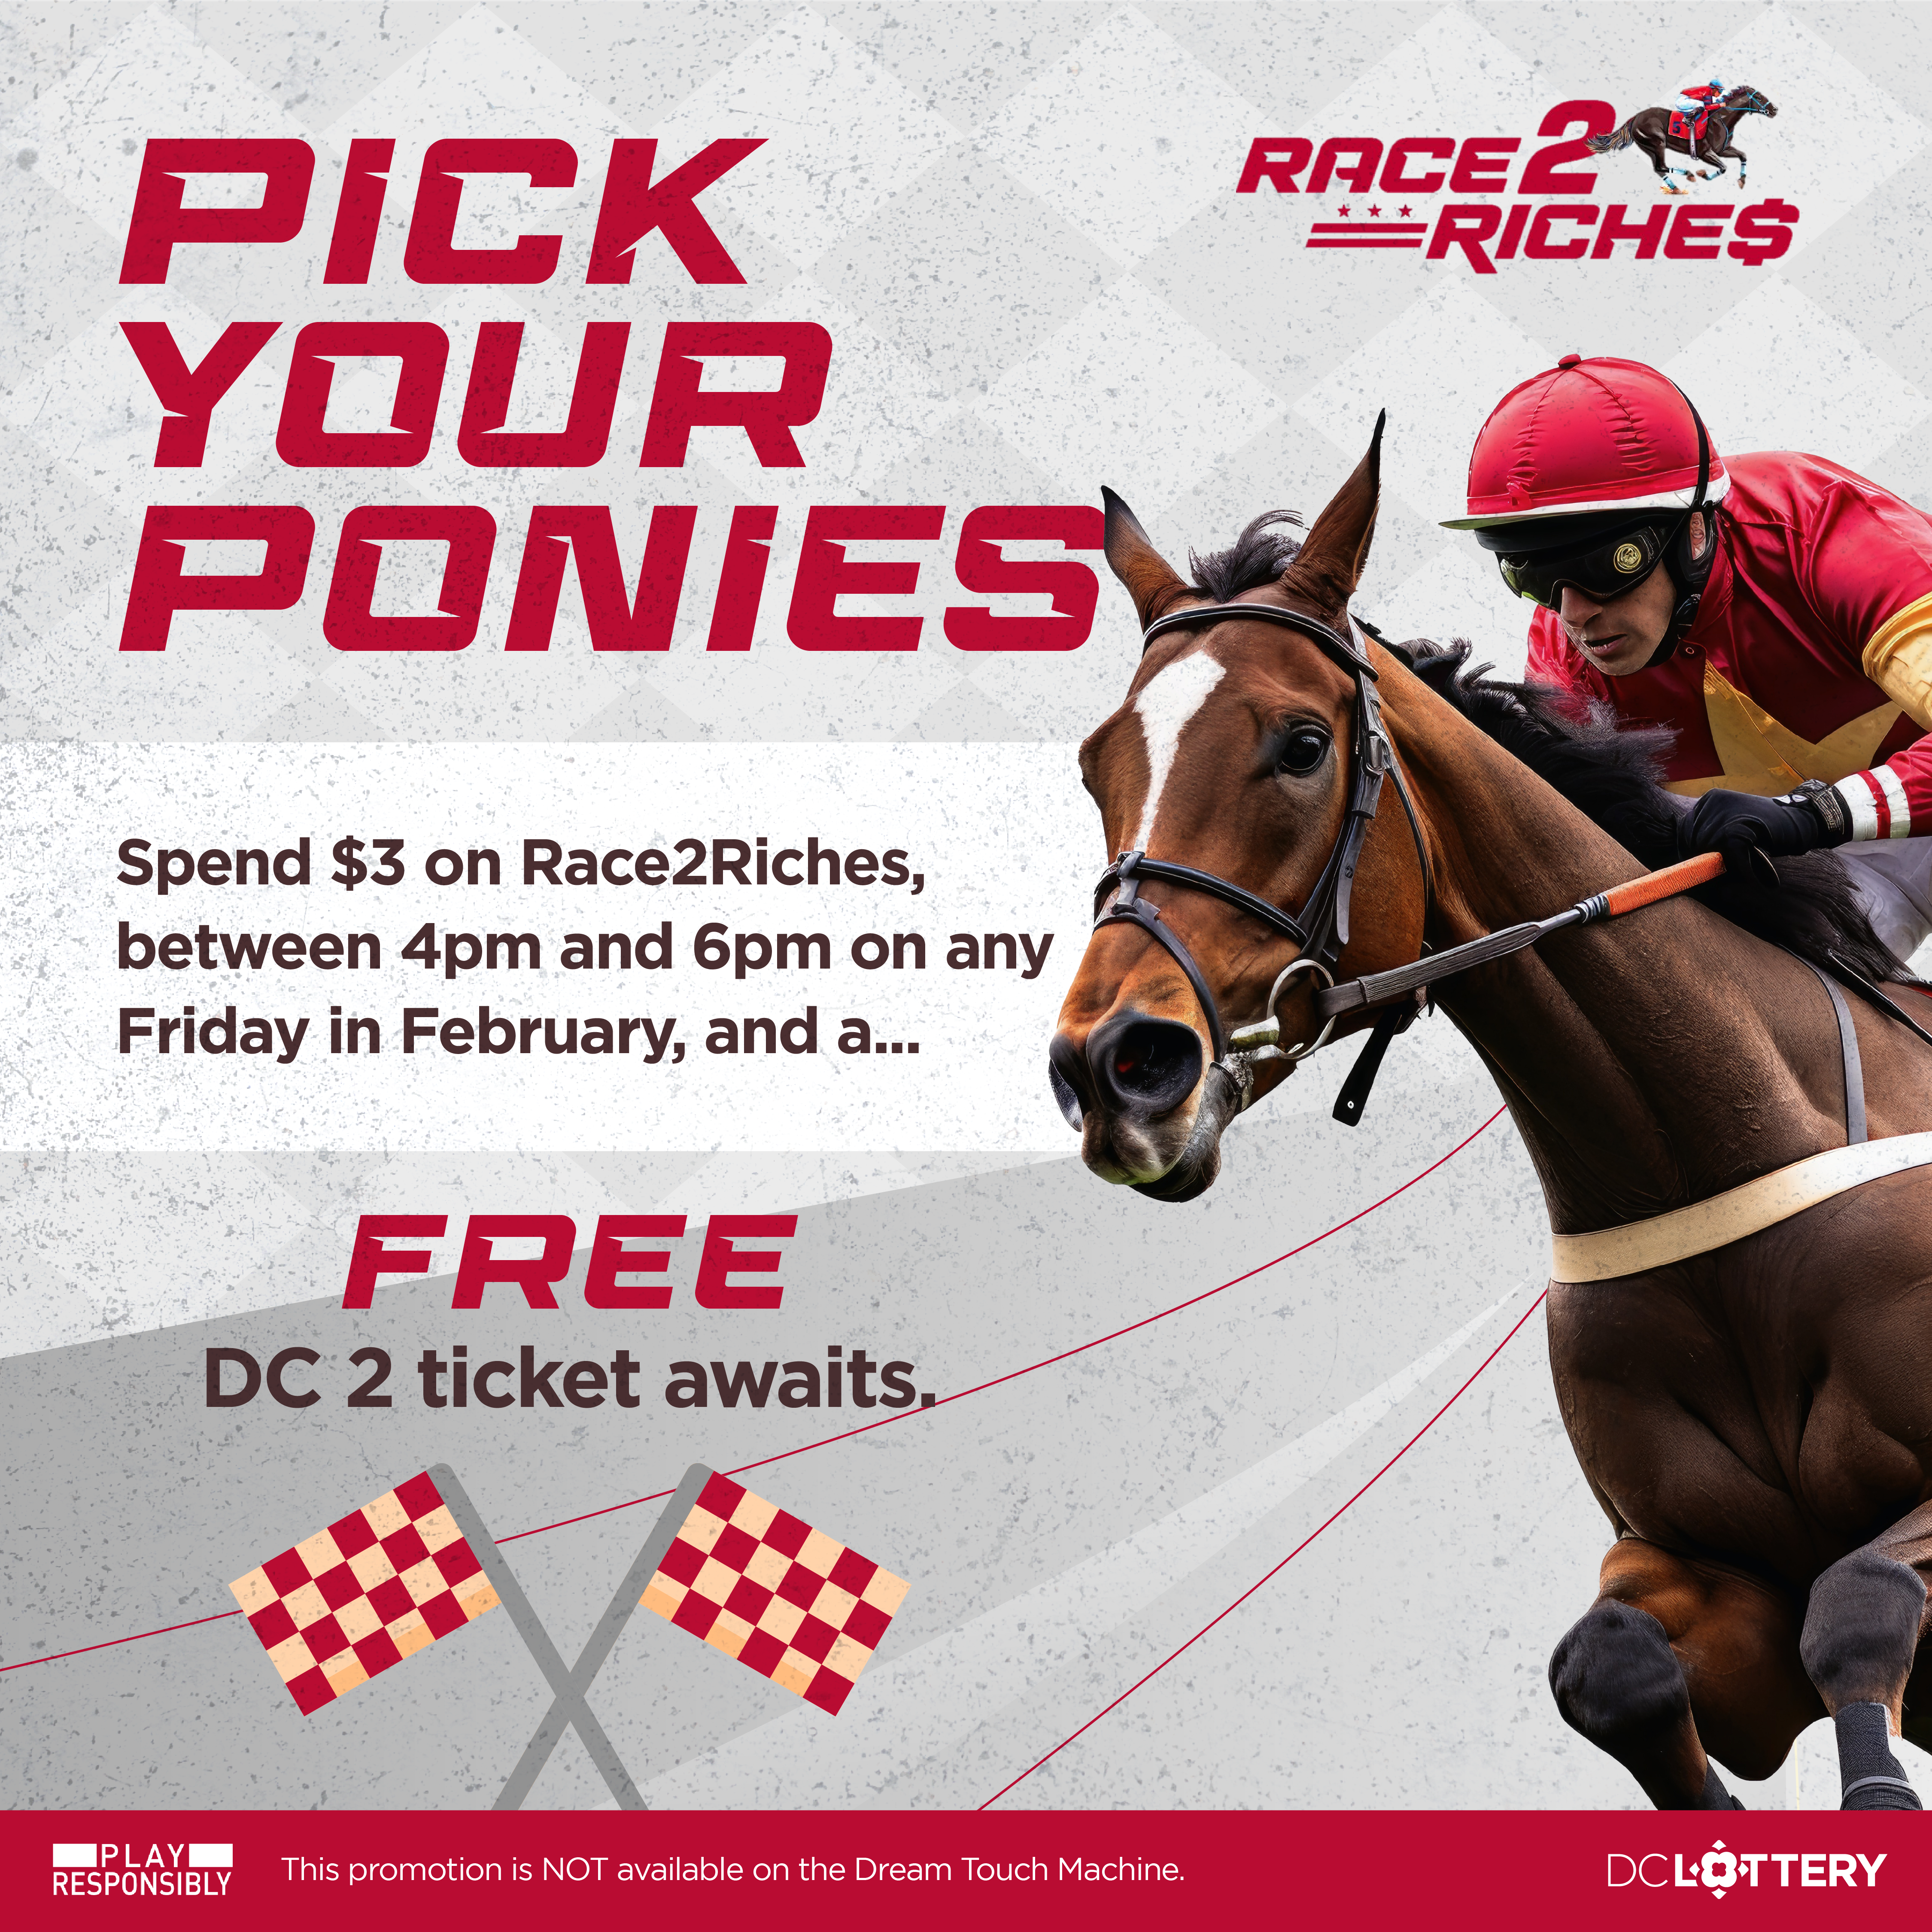 FREE DC 2 quick pick with the purchase of a Race2Riches ticket every Friday in February